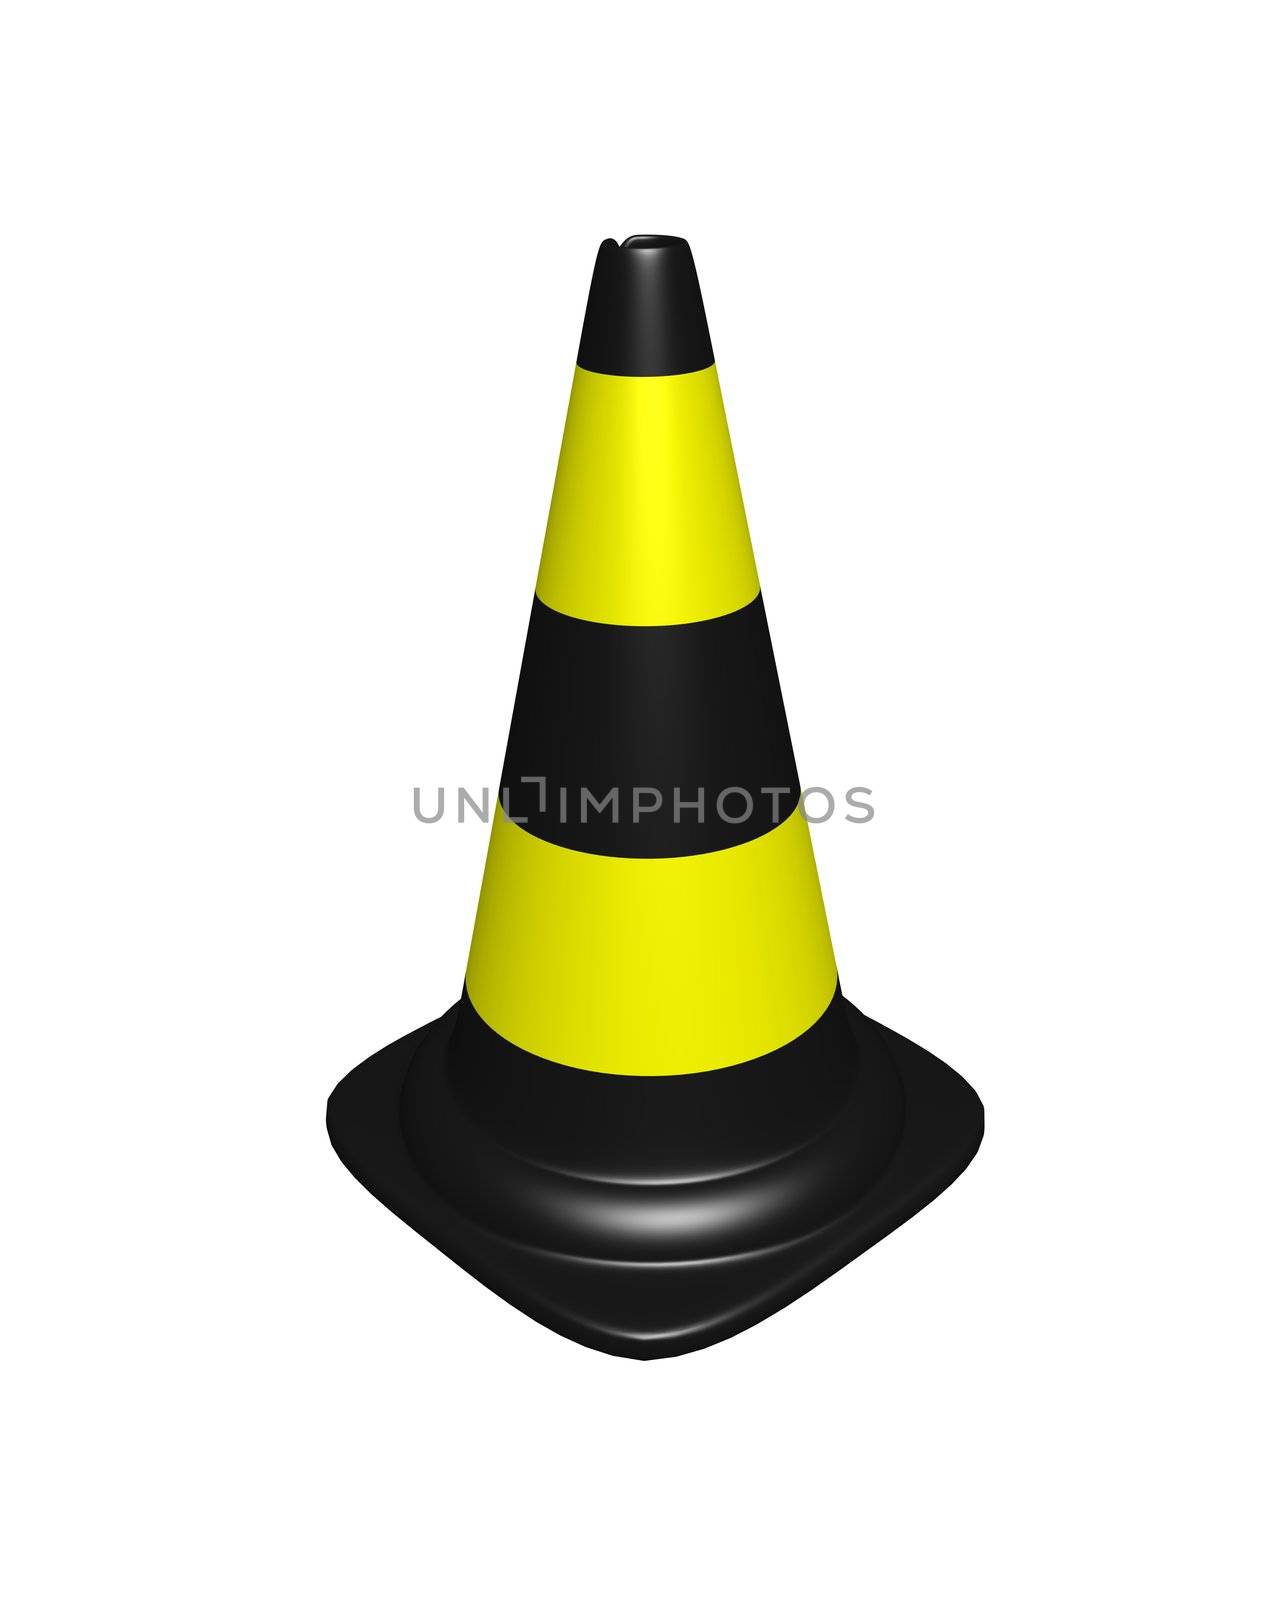 conical landmark for warning on road